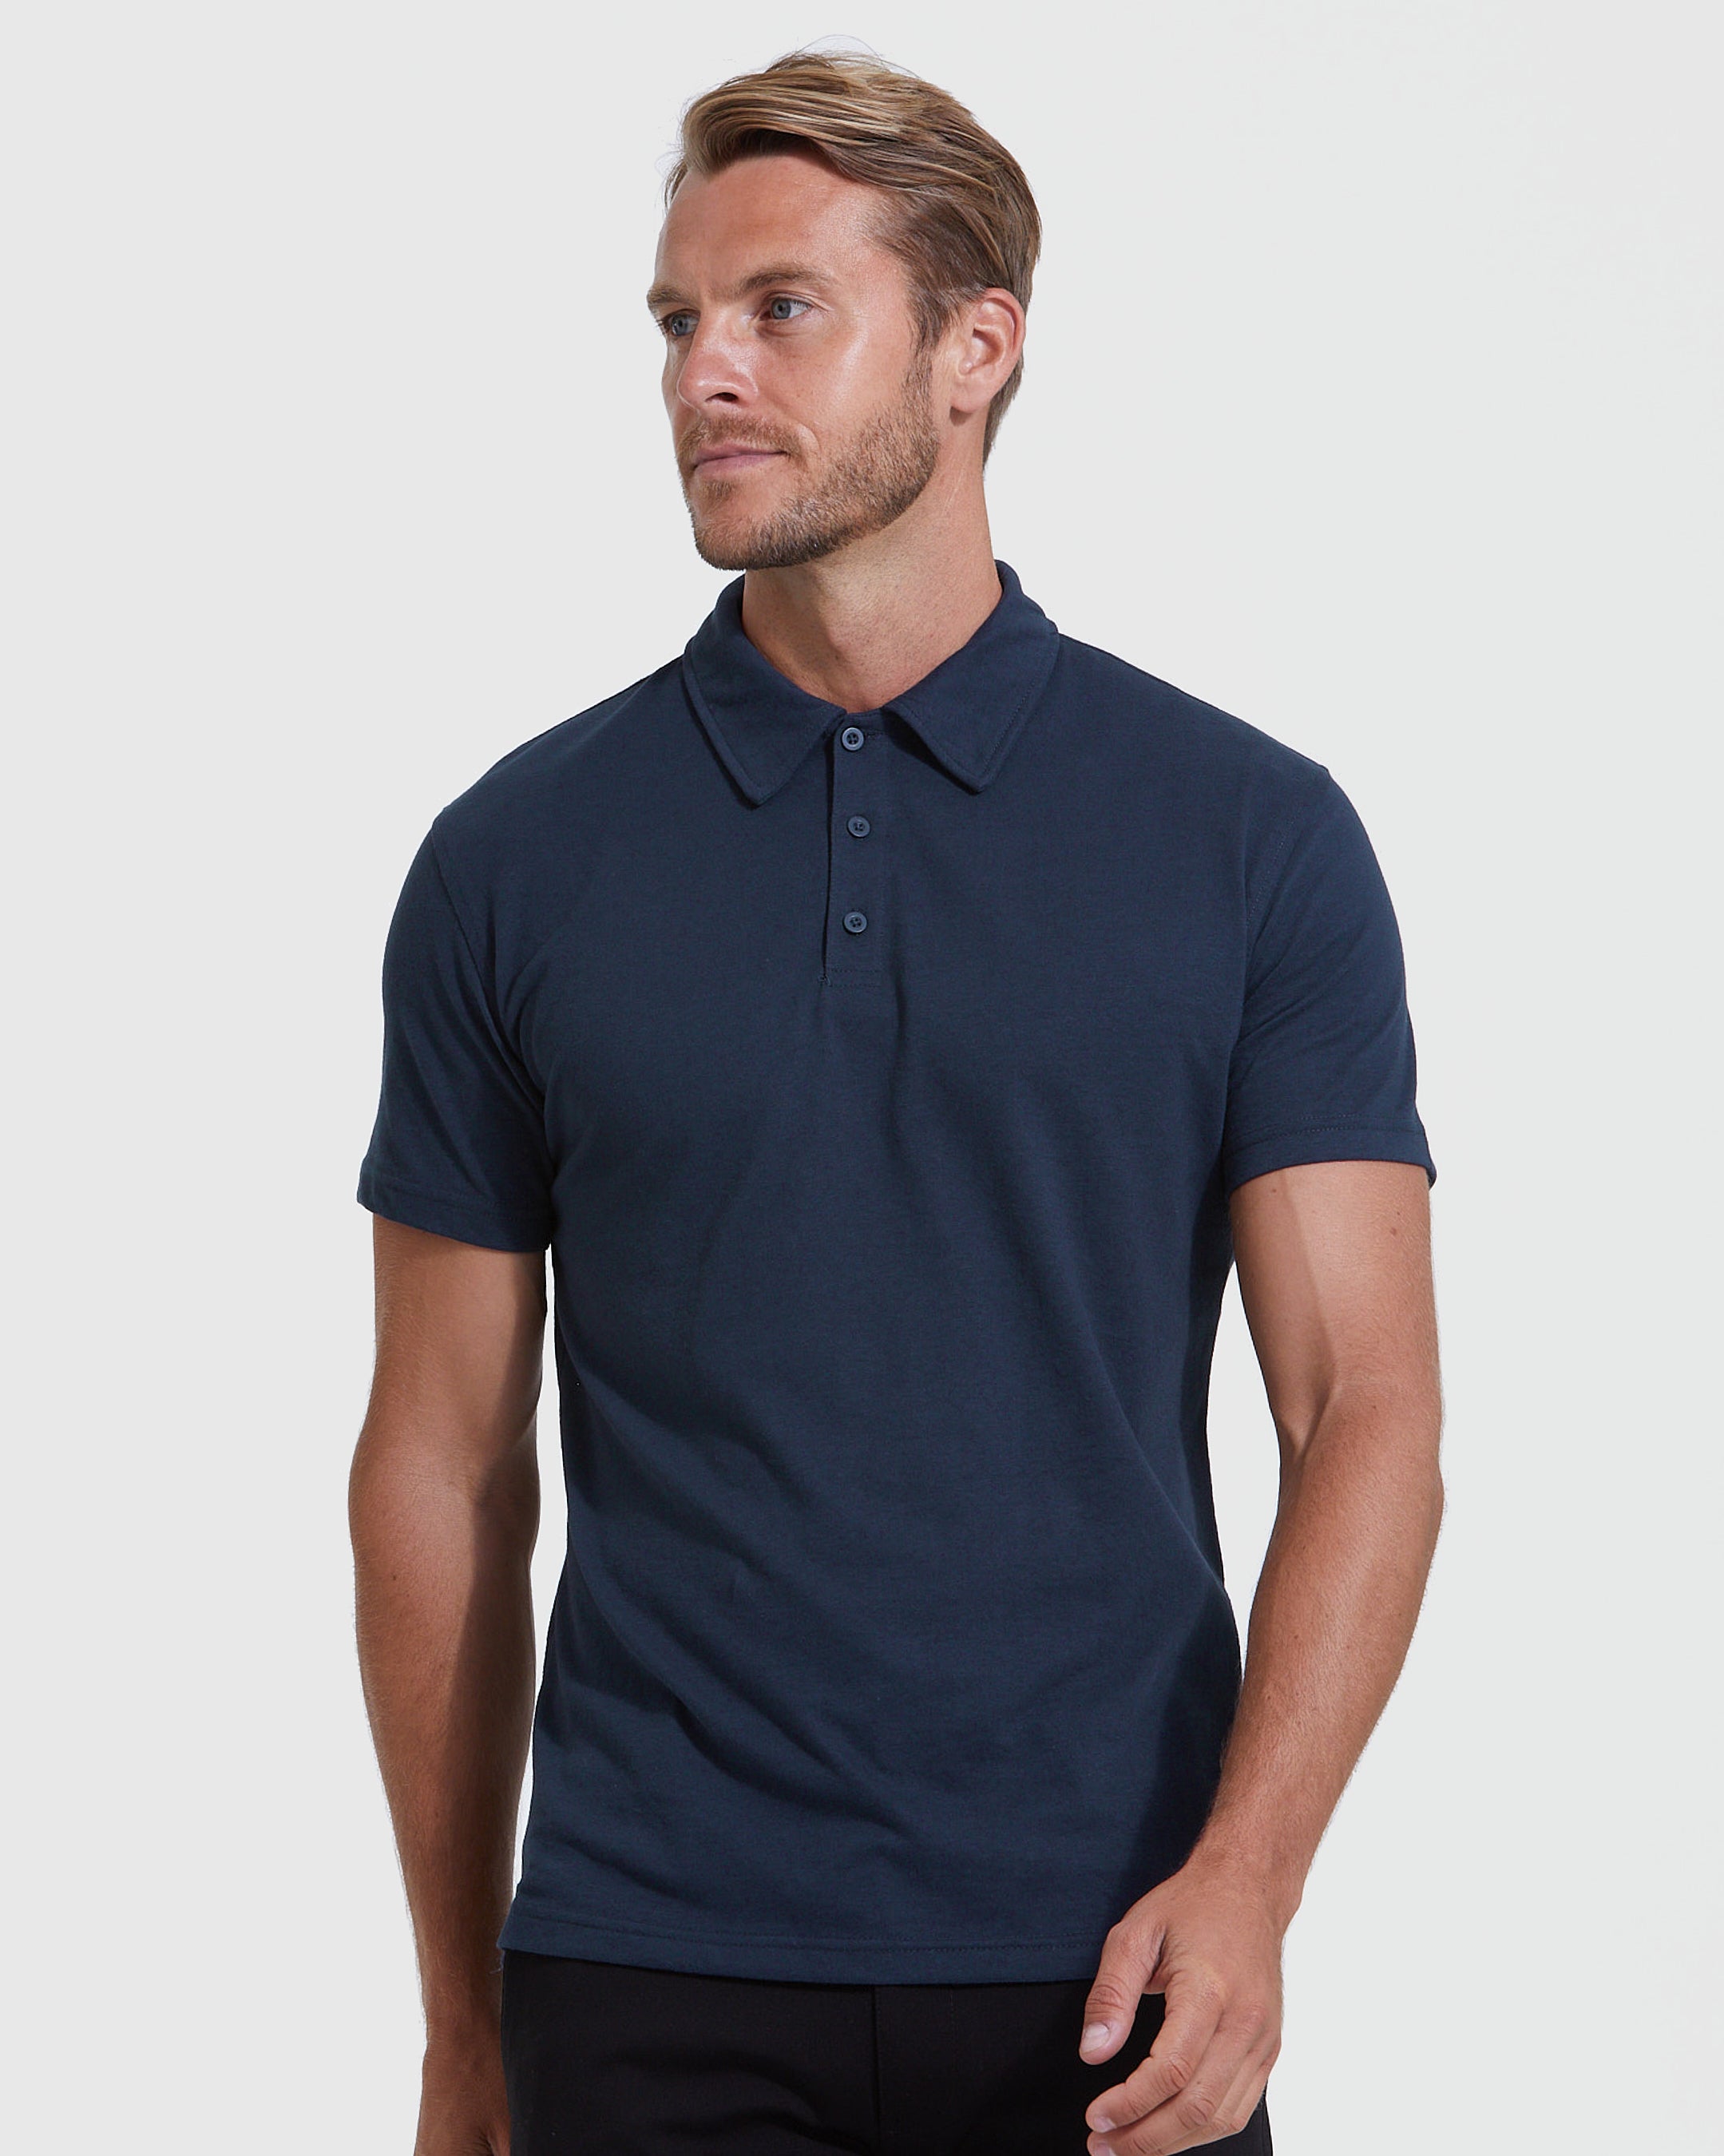 All Navy Polo 3-Pack